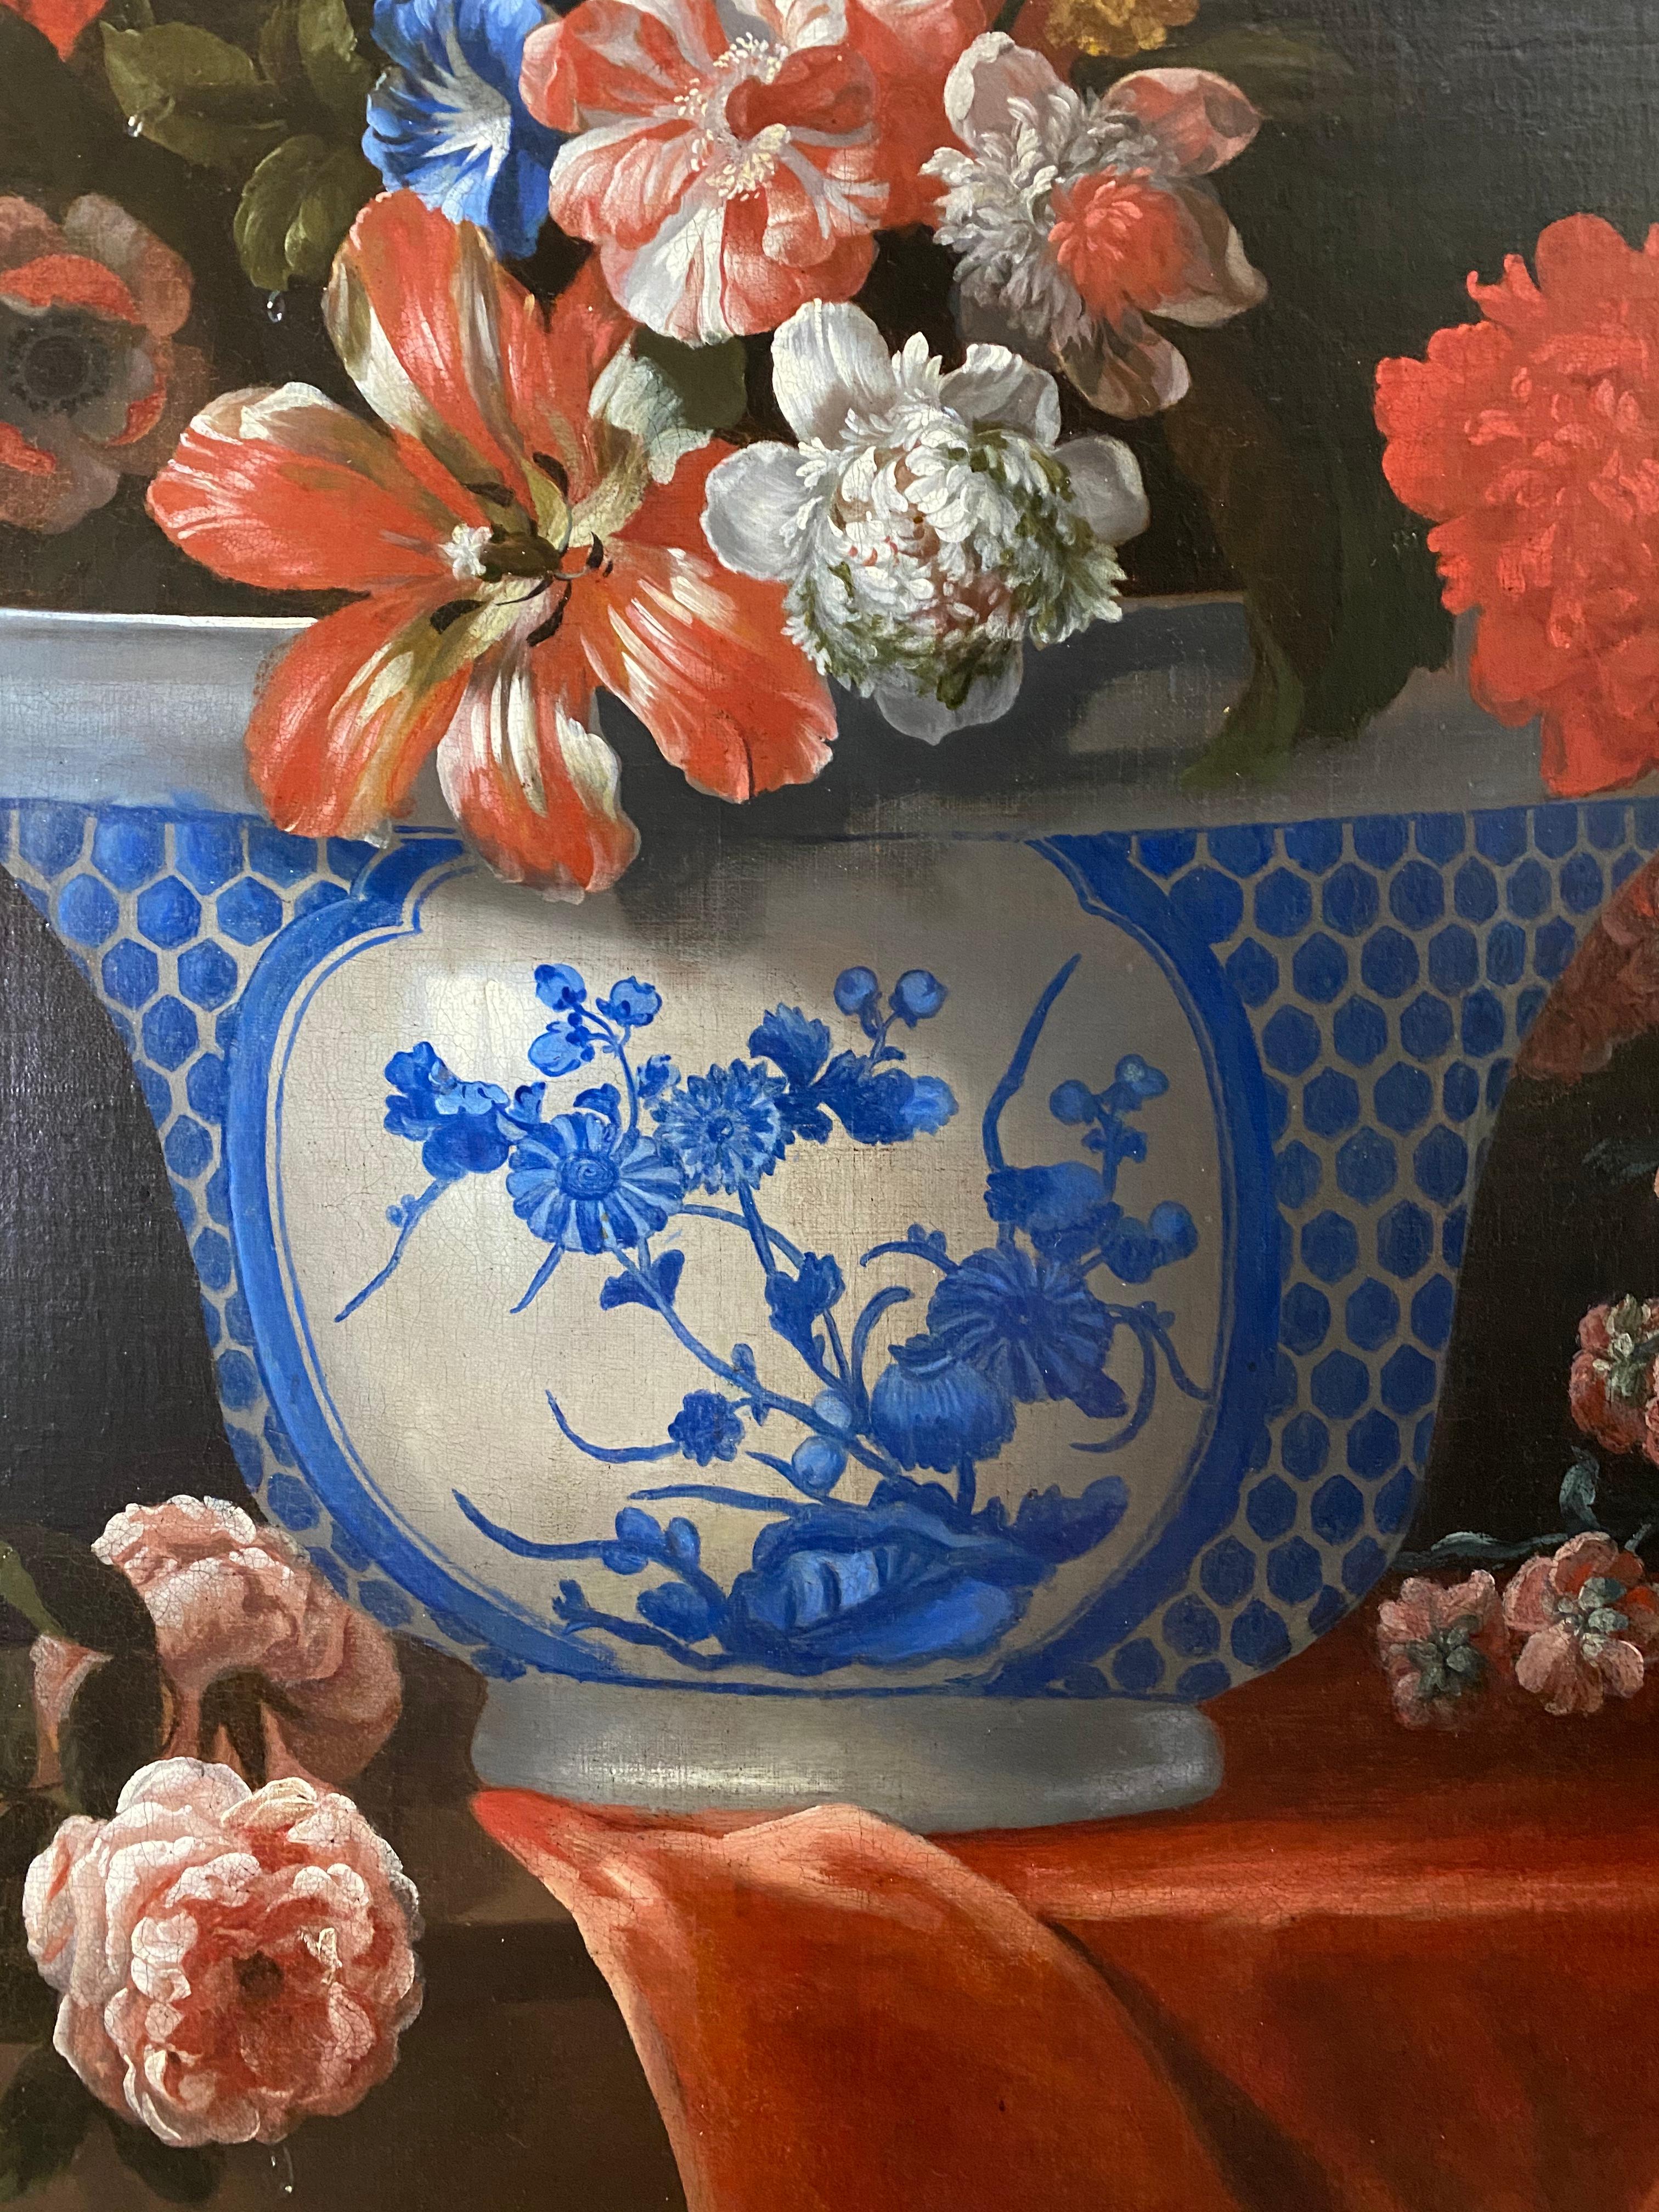 18TH CENTURY DUTCH FLORAL STILL LIFE WITH A CHINESE BOWL AND ORANGE DRAPERY - Old Masters Painting by Pieter Casteels III